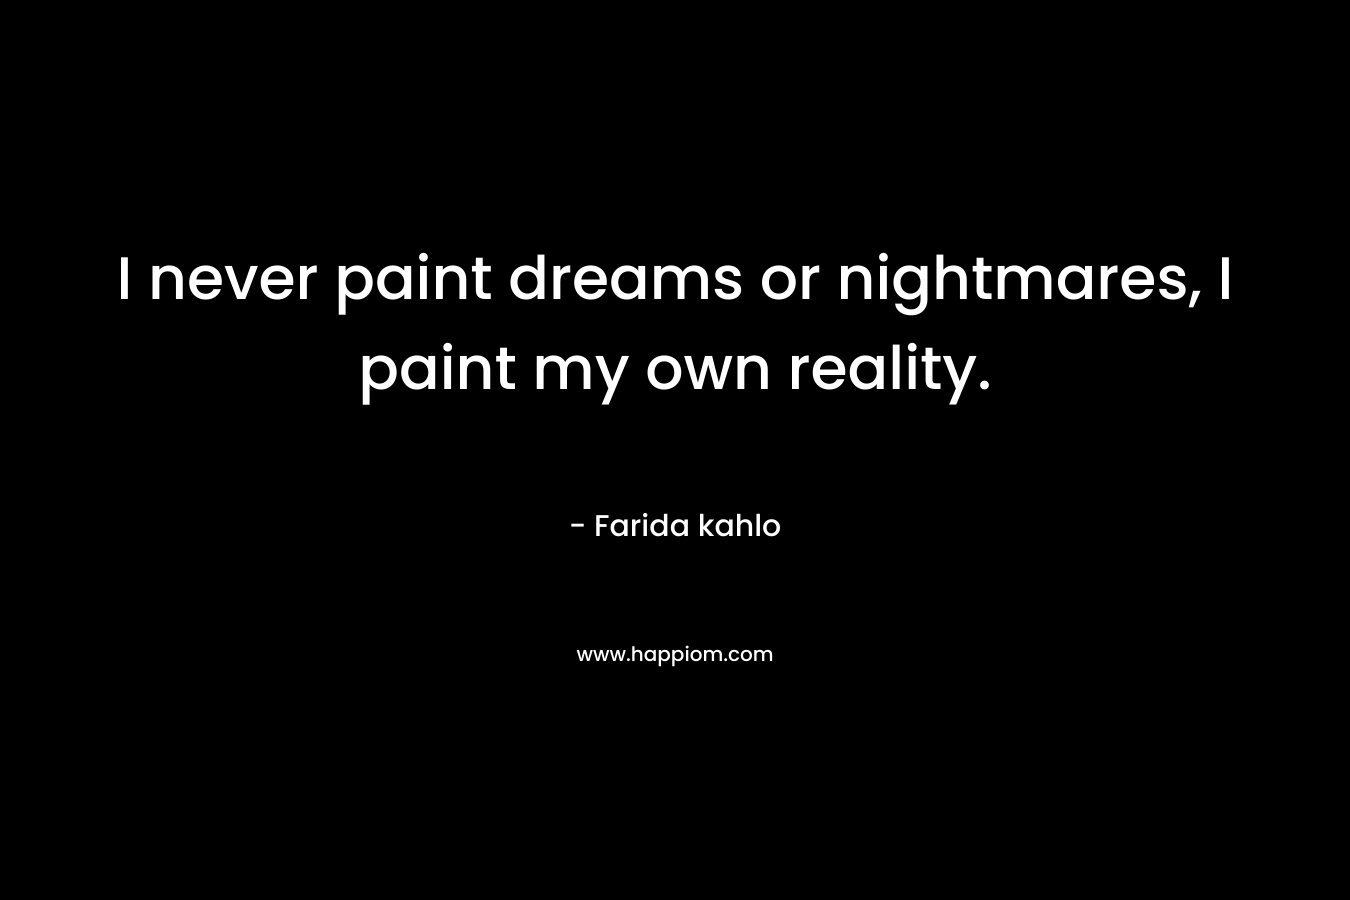 I never paint dreams or nightmares, I paint my own reality.